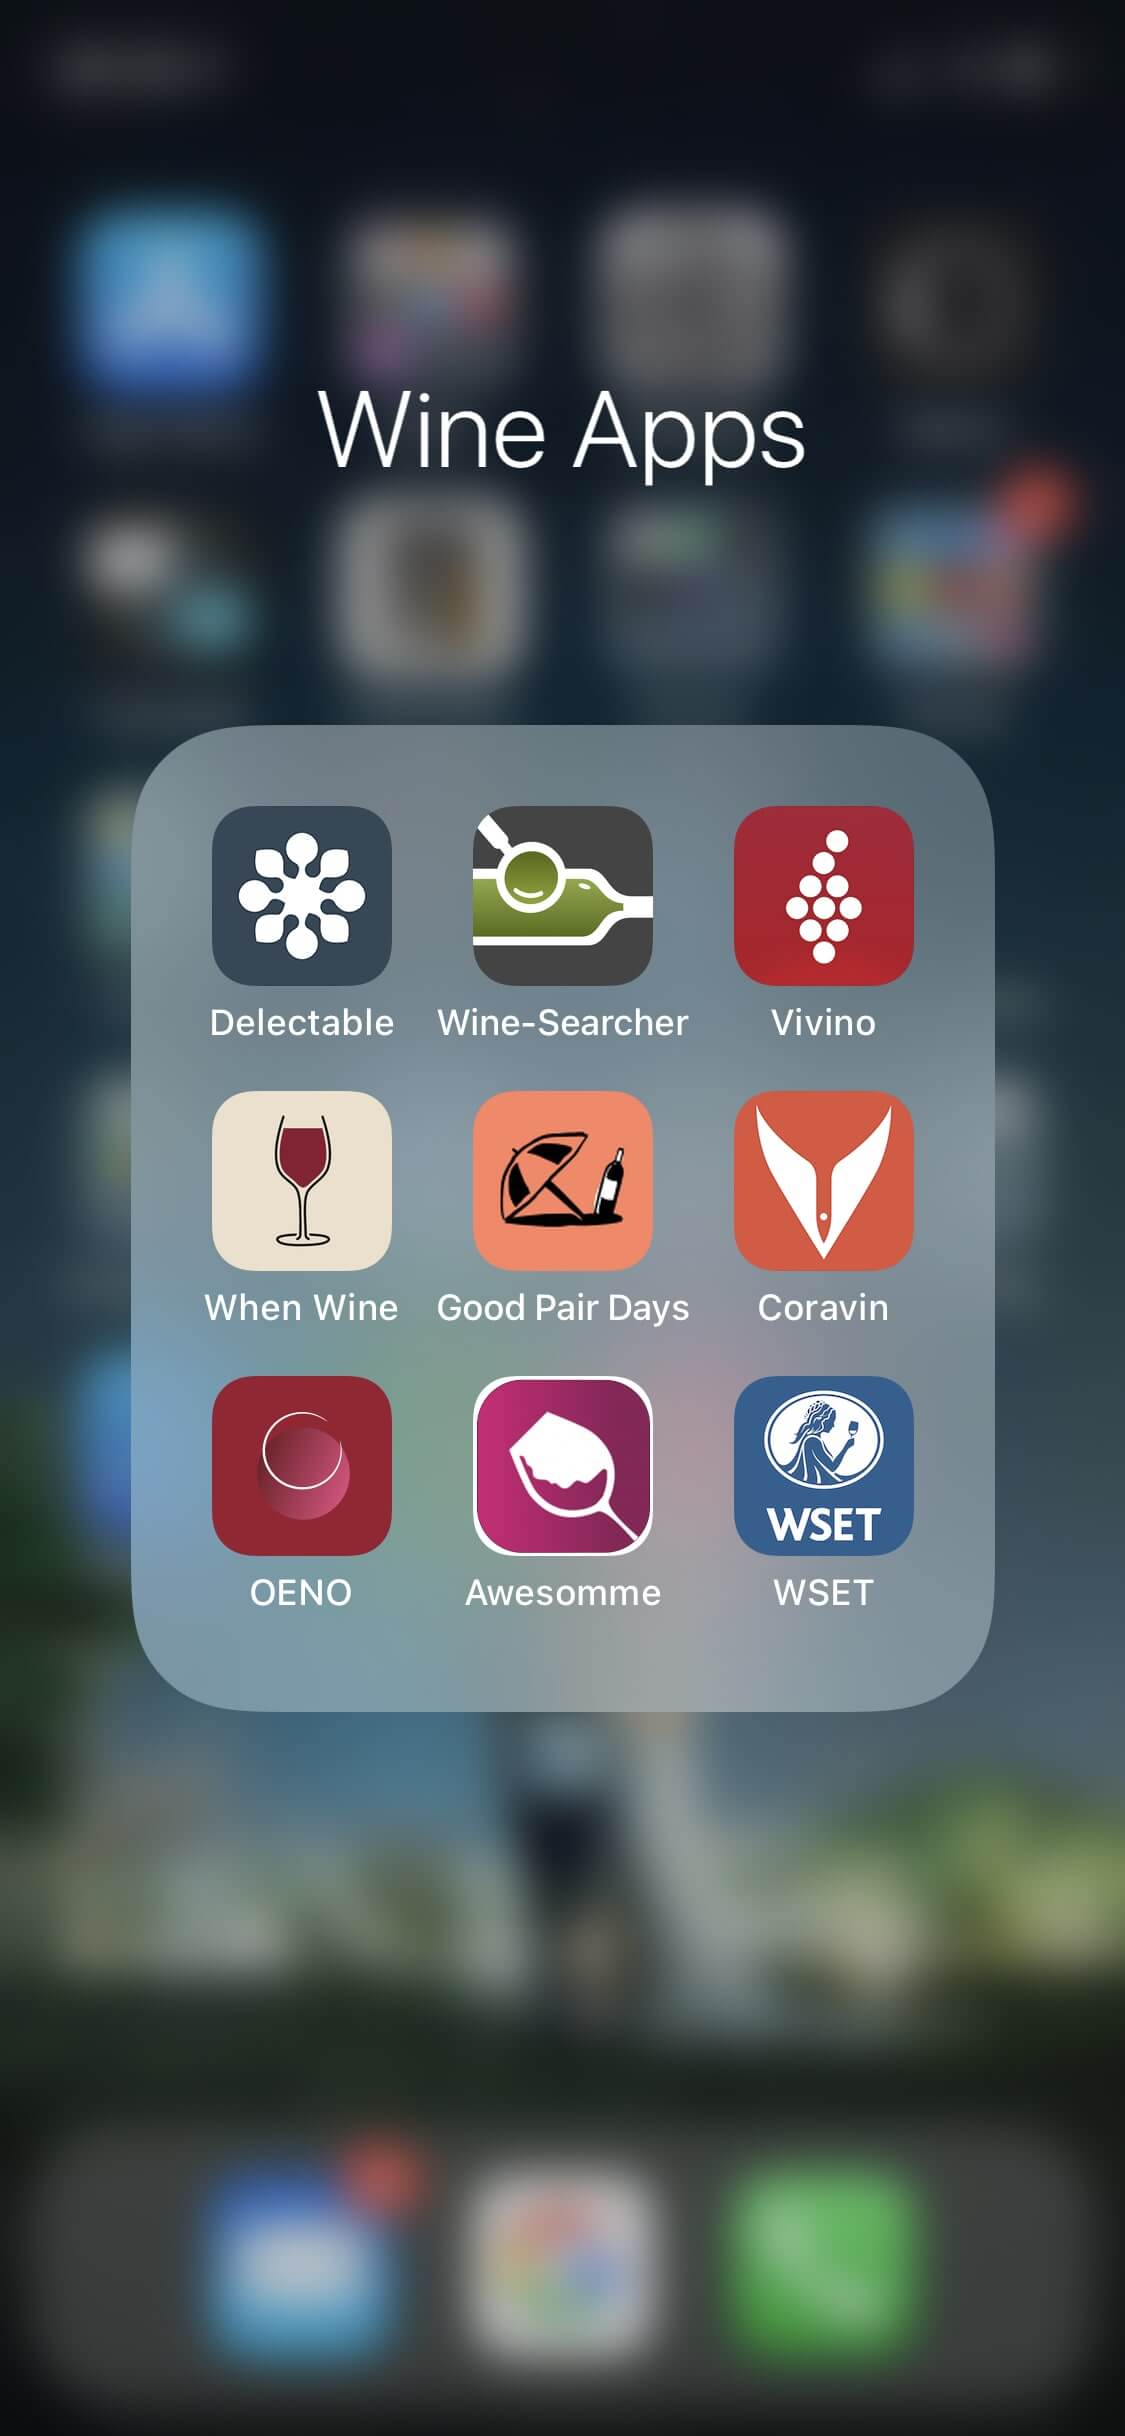 Wine Apps You Need to Check Out in 2022